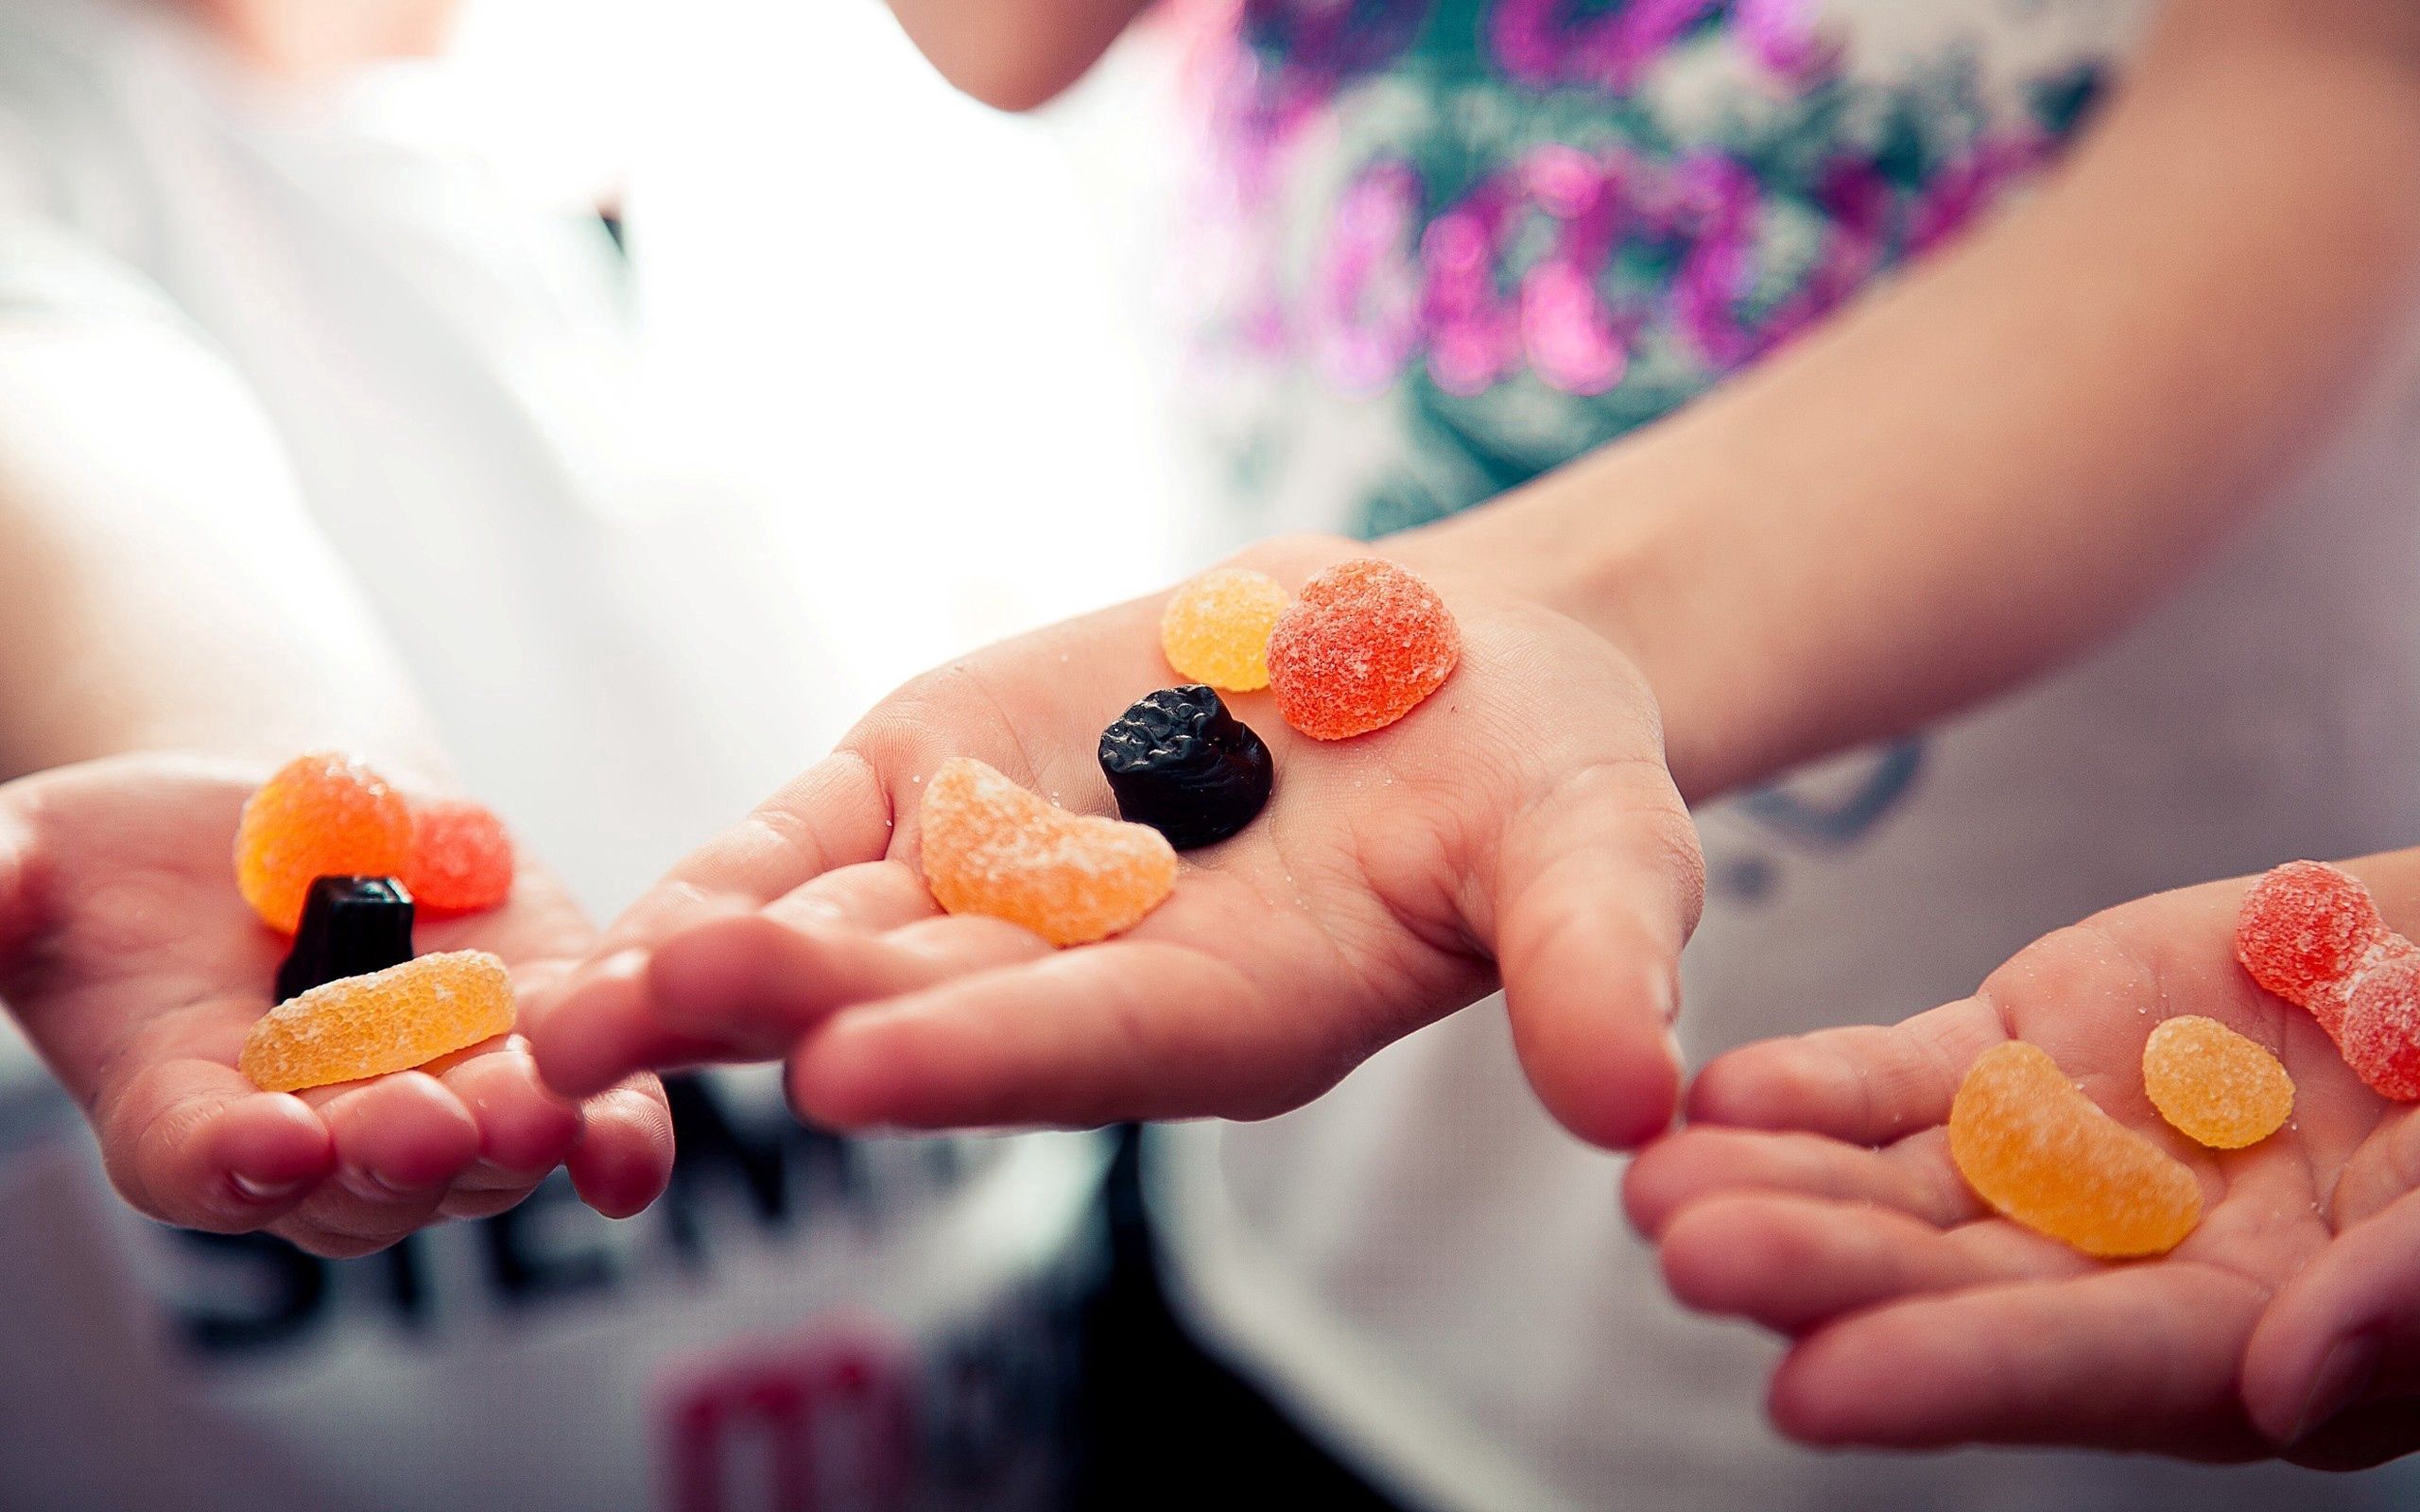 miscellaneous, candies, miscellanea, hands, marmalade High Definition image